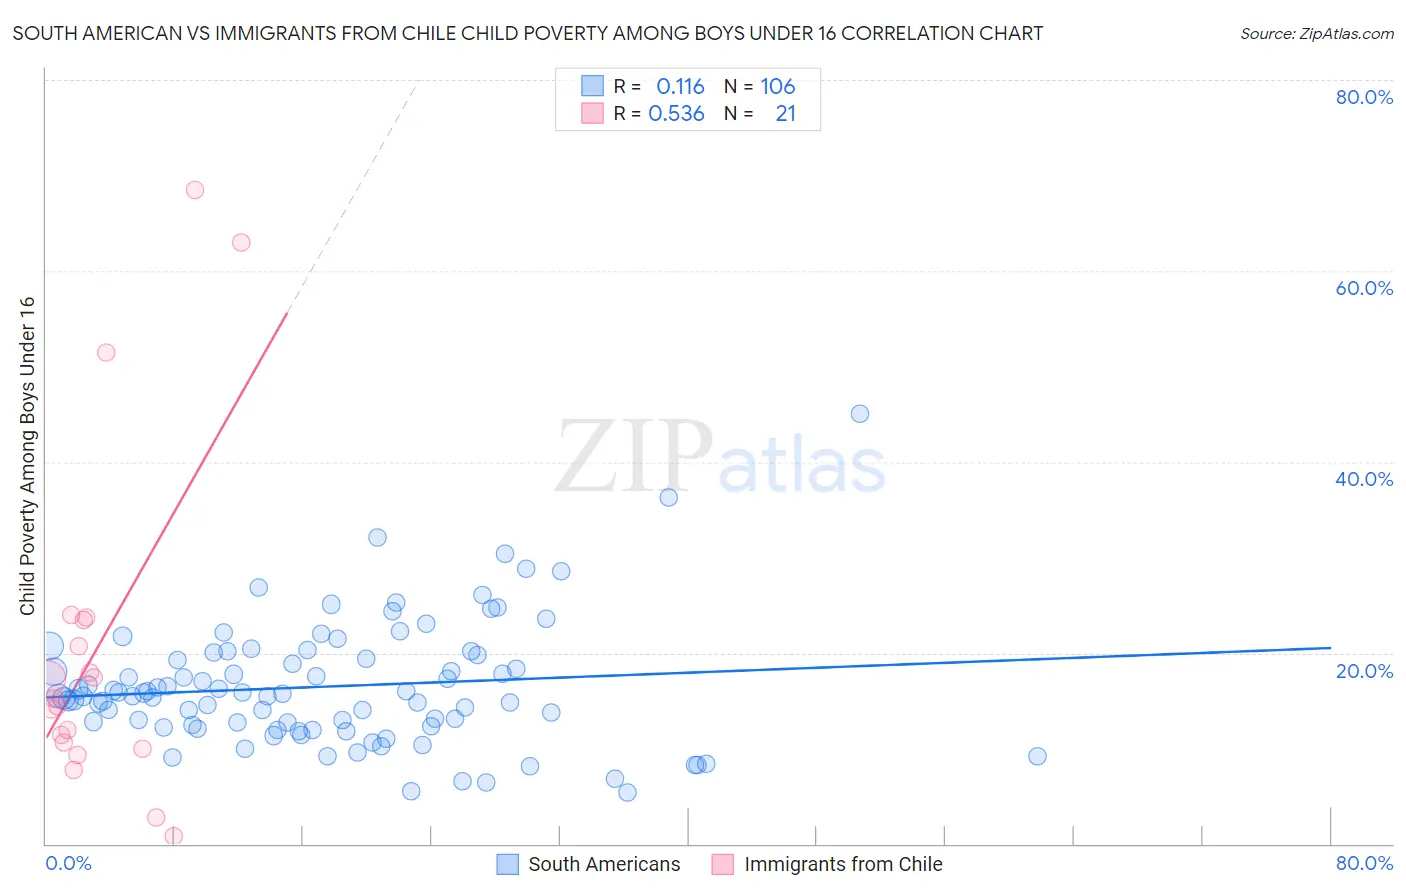 South American vs Immigrants from Chile Child Poverty Among Boys Under 16